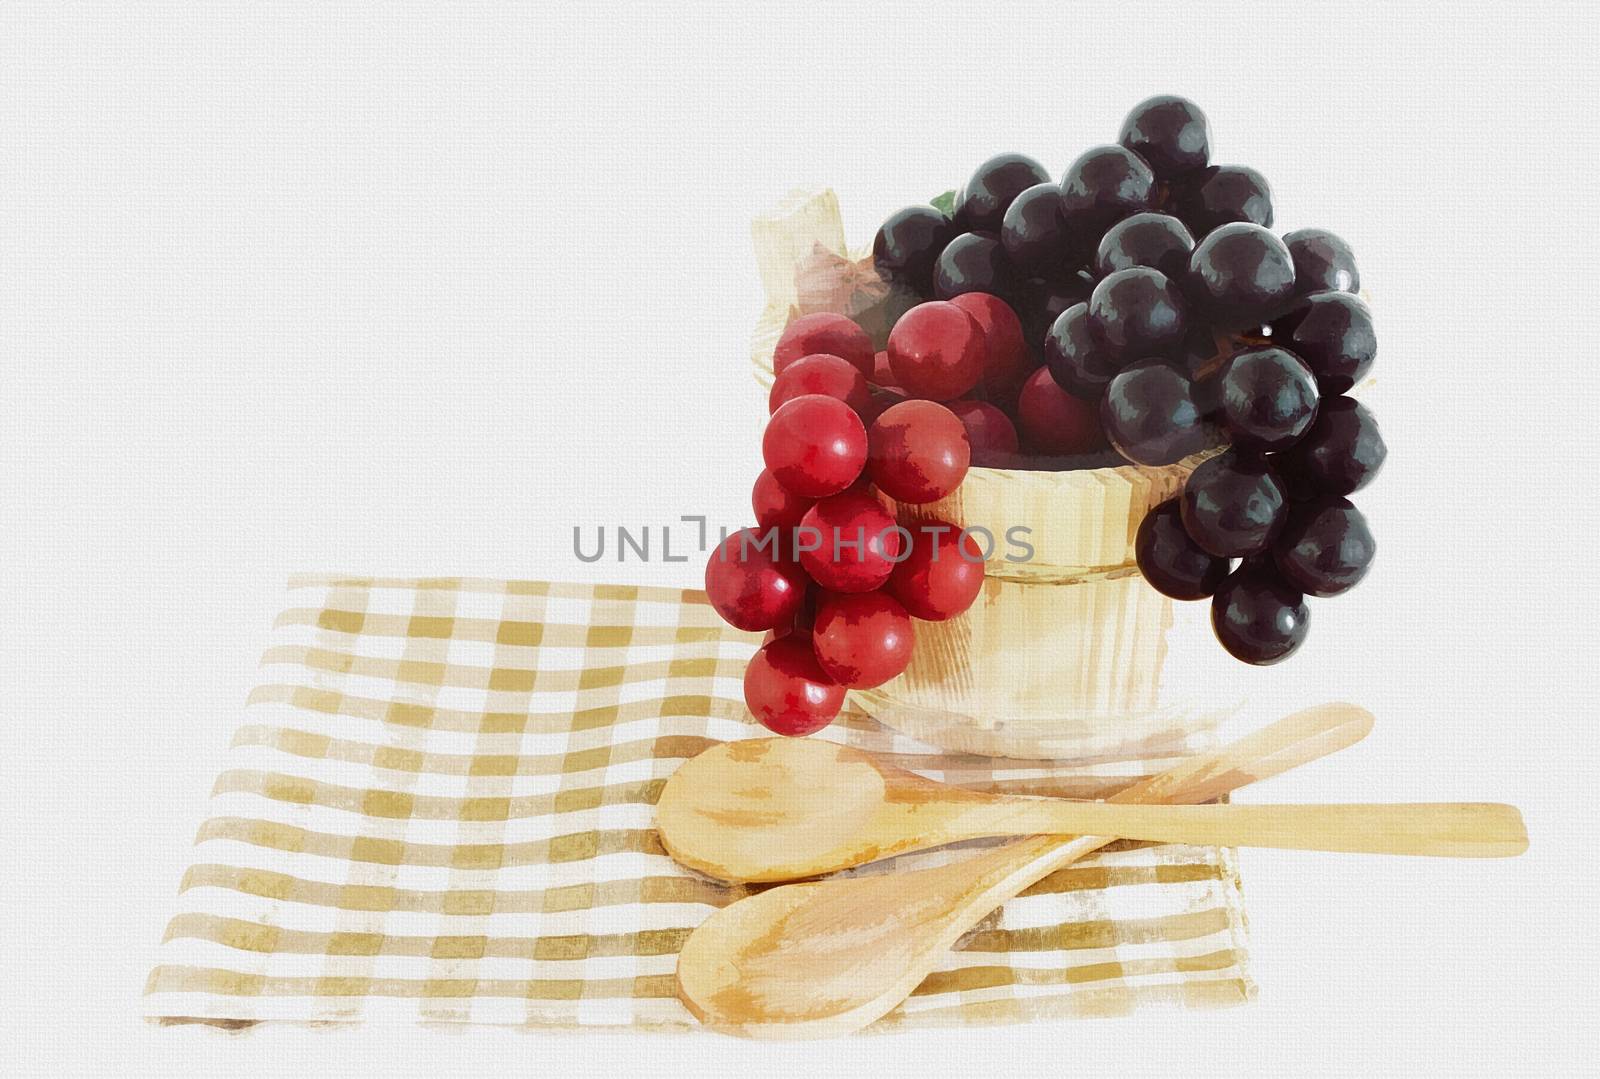 Wooden cooking utensils with bucket watercolor on paper background, art of watercolor filter